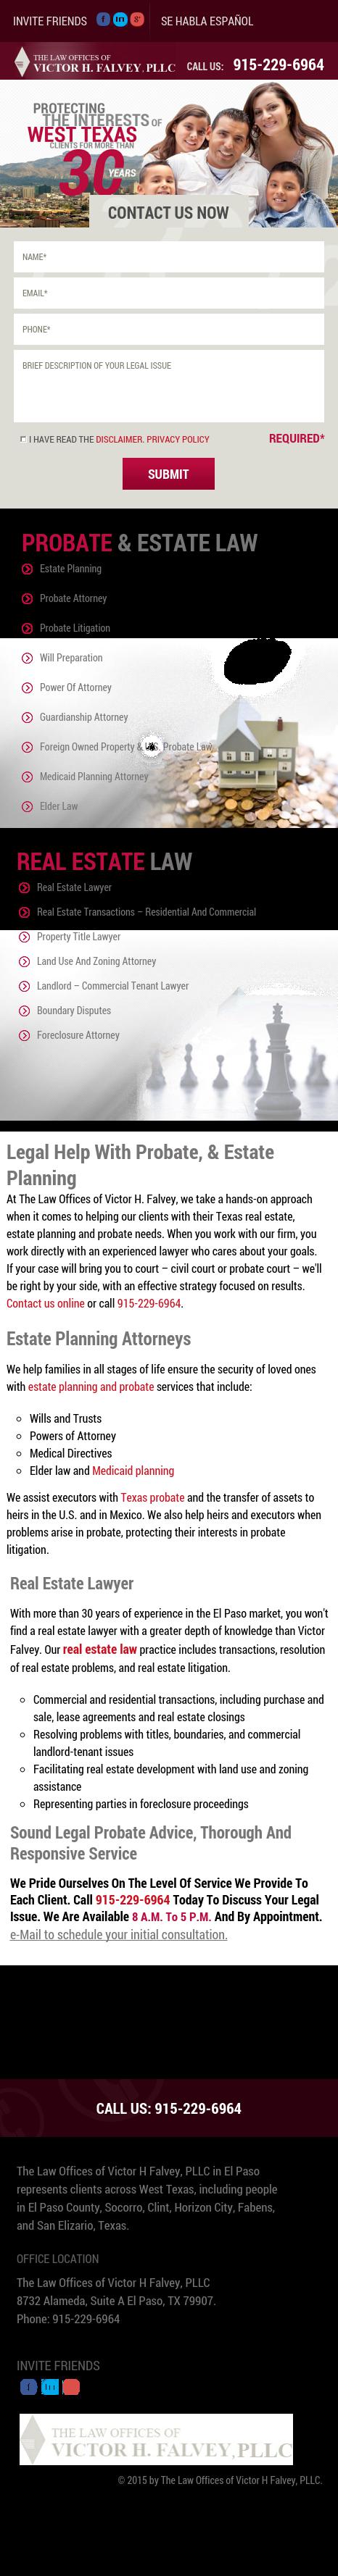 The Law Offices of Victor H. Falvey - El Paso TX Lawyers